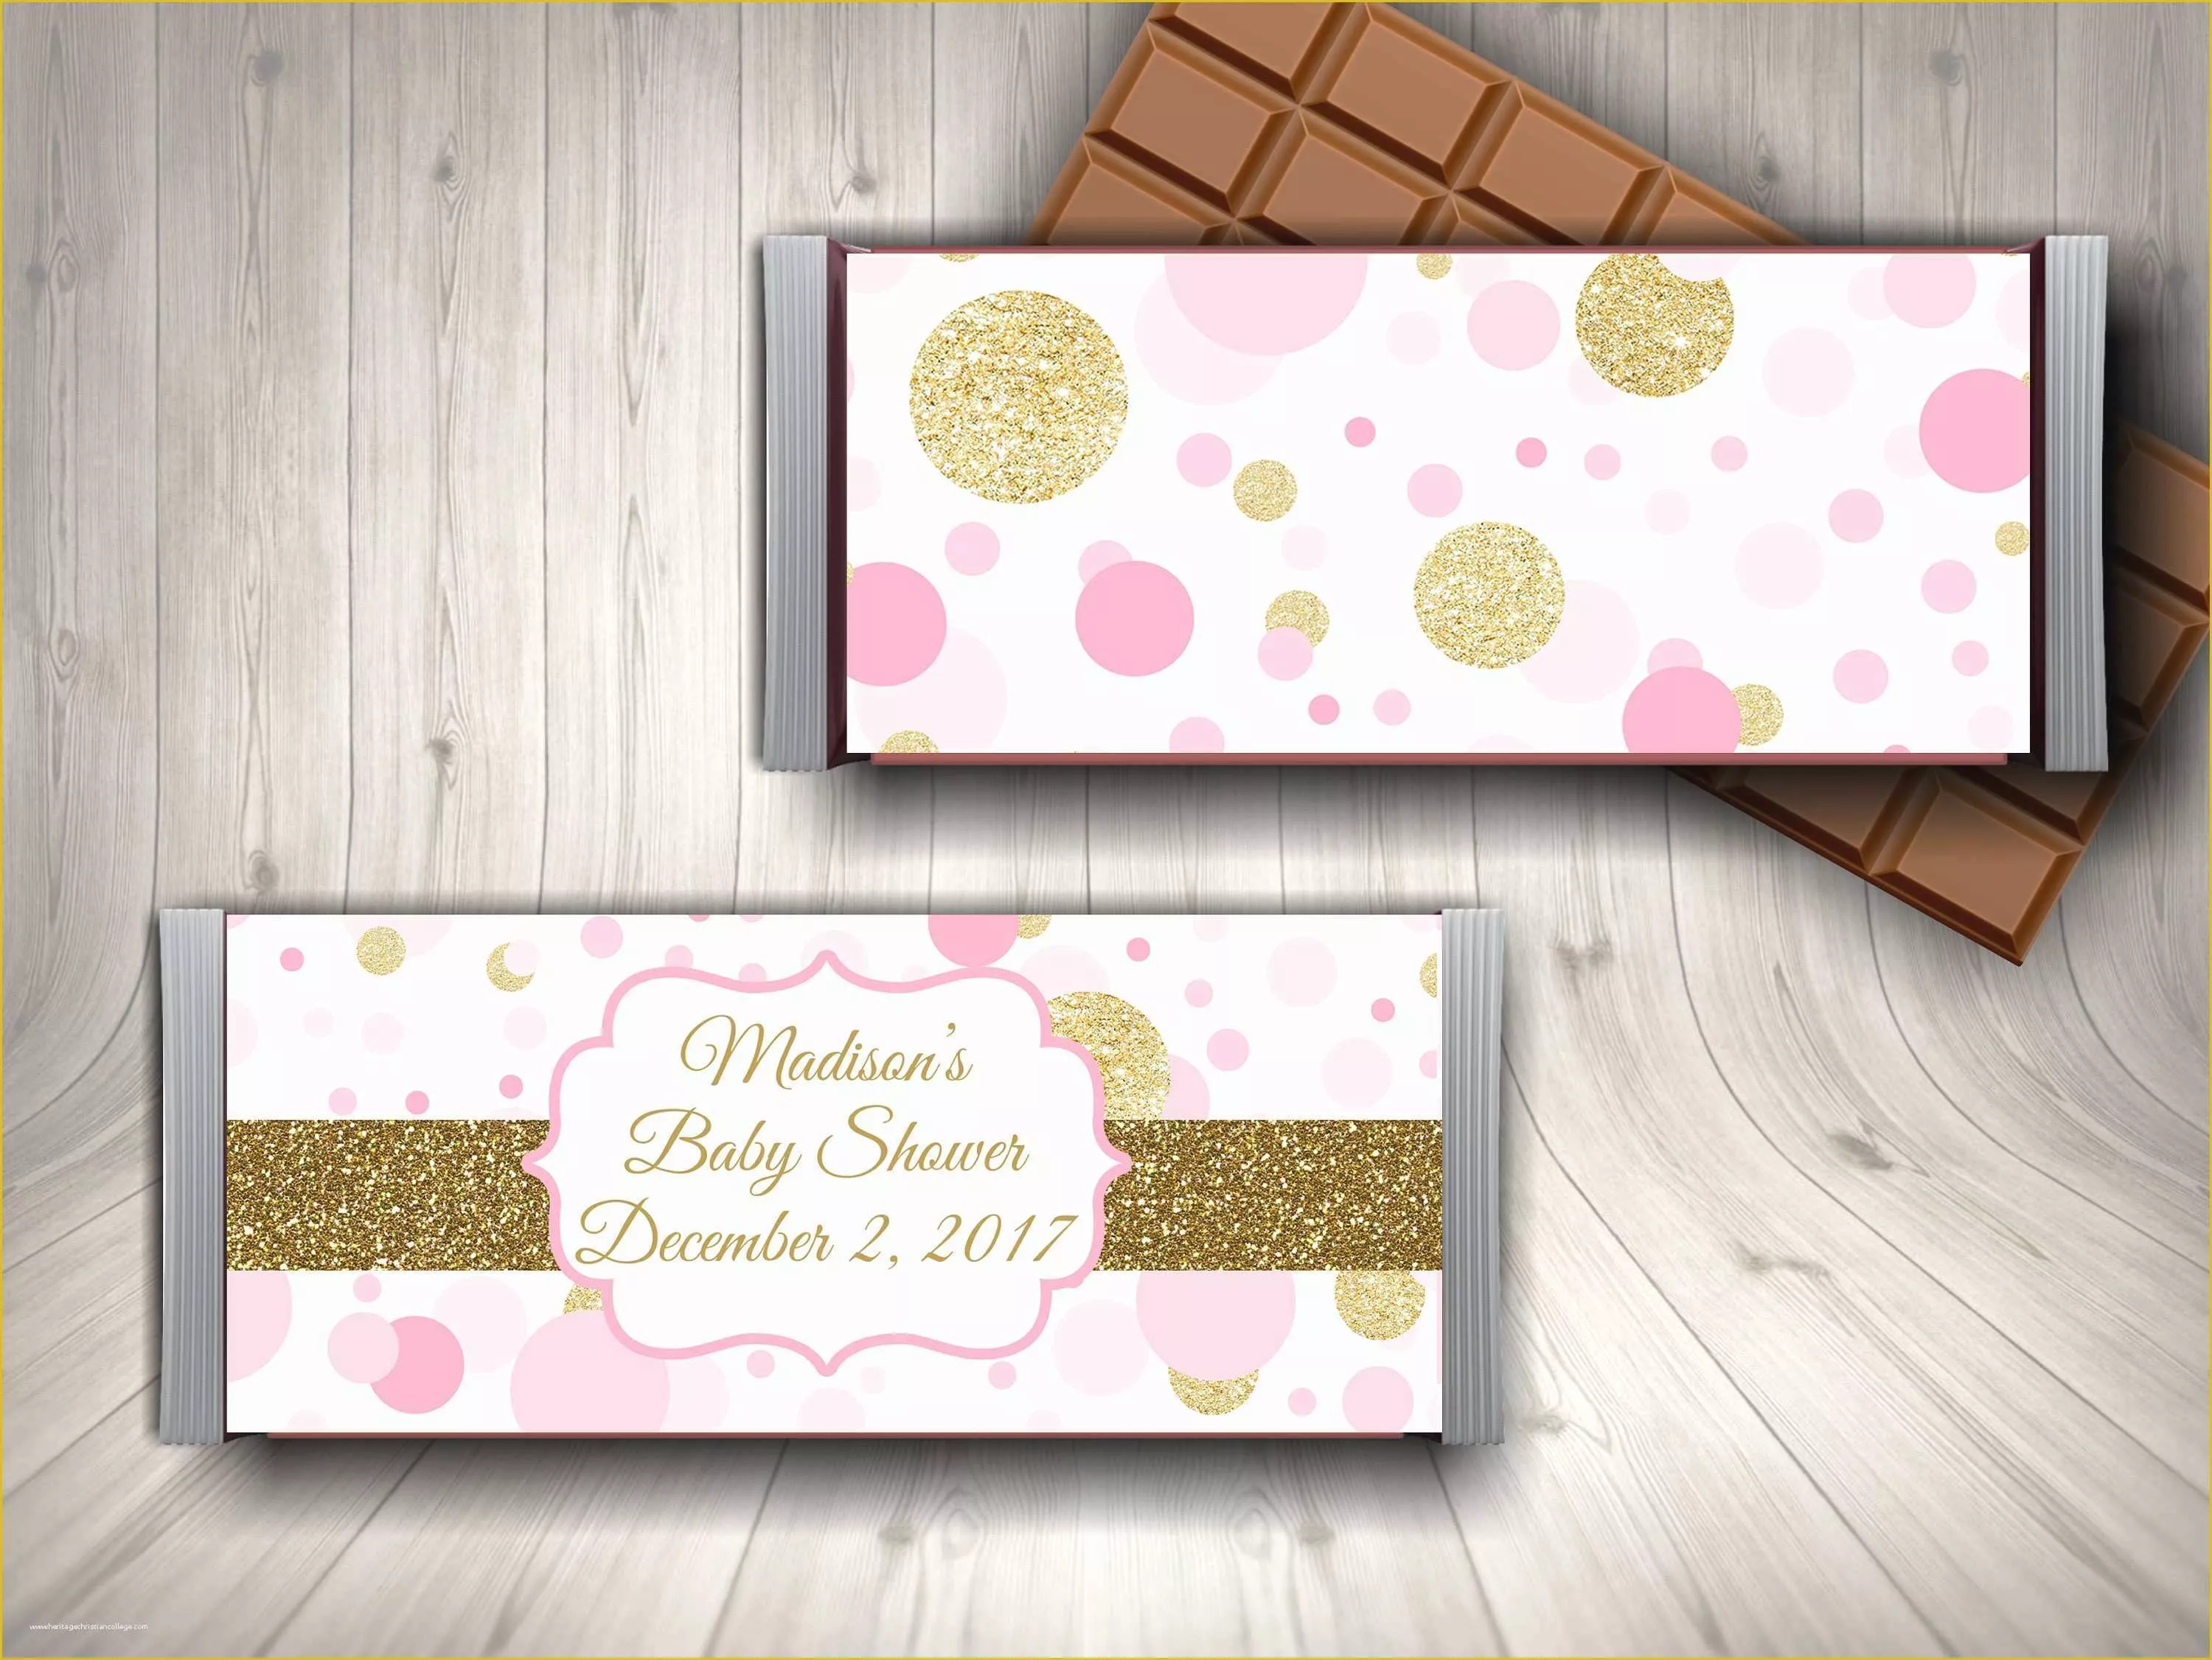 Personalized Candy Wrapper Template Free Of Fresh Free Candy Bar Wrapper Template Baby Shower